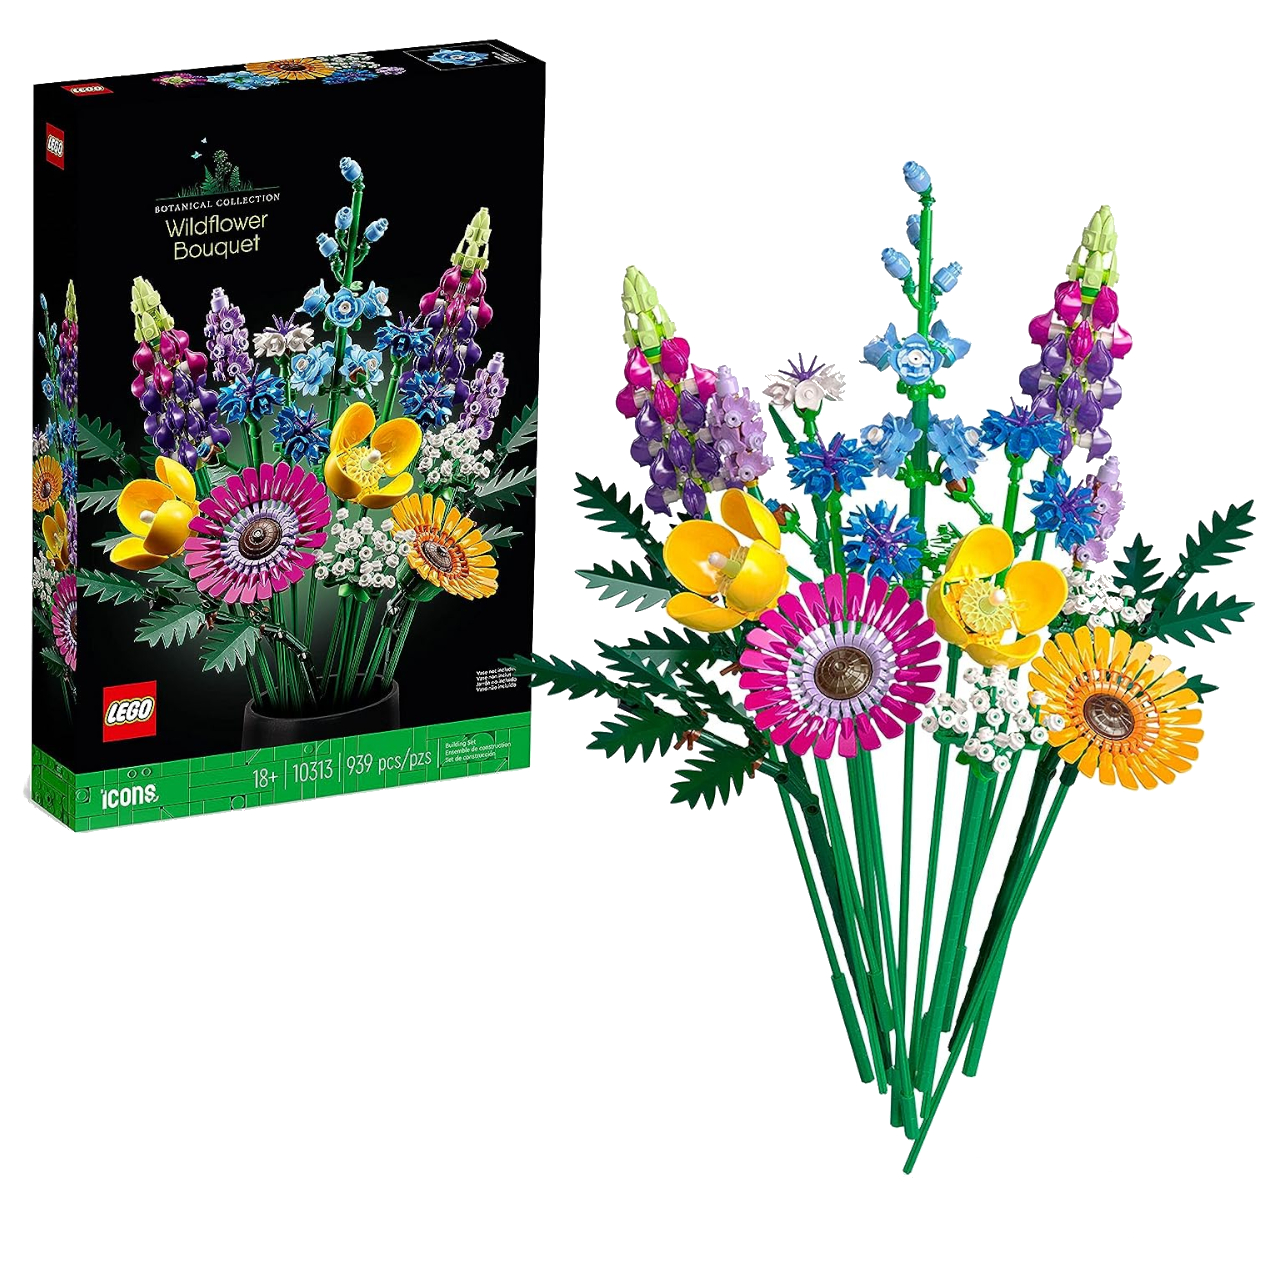 Lego flowers make the perfect quirky Mother’s Day gift and they’re at their lowest ever price right now